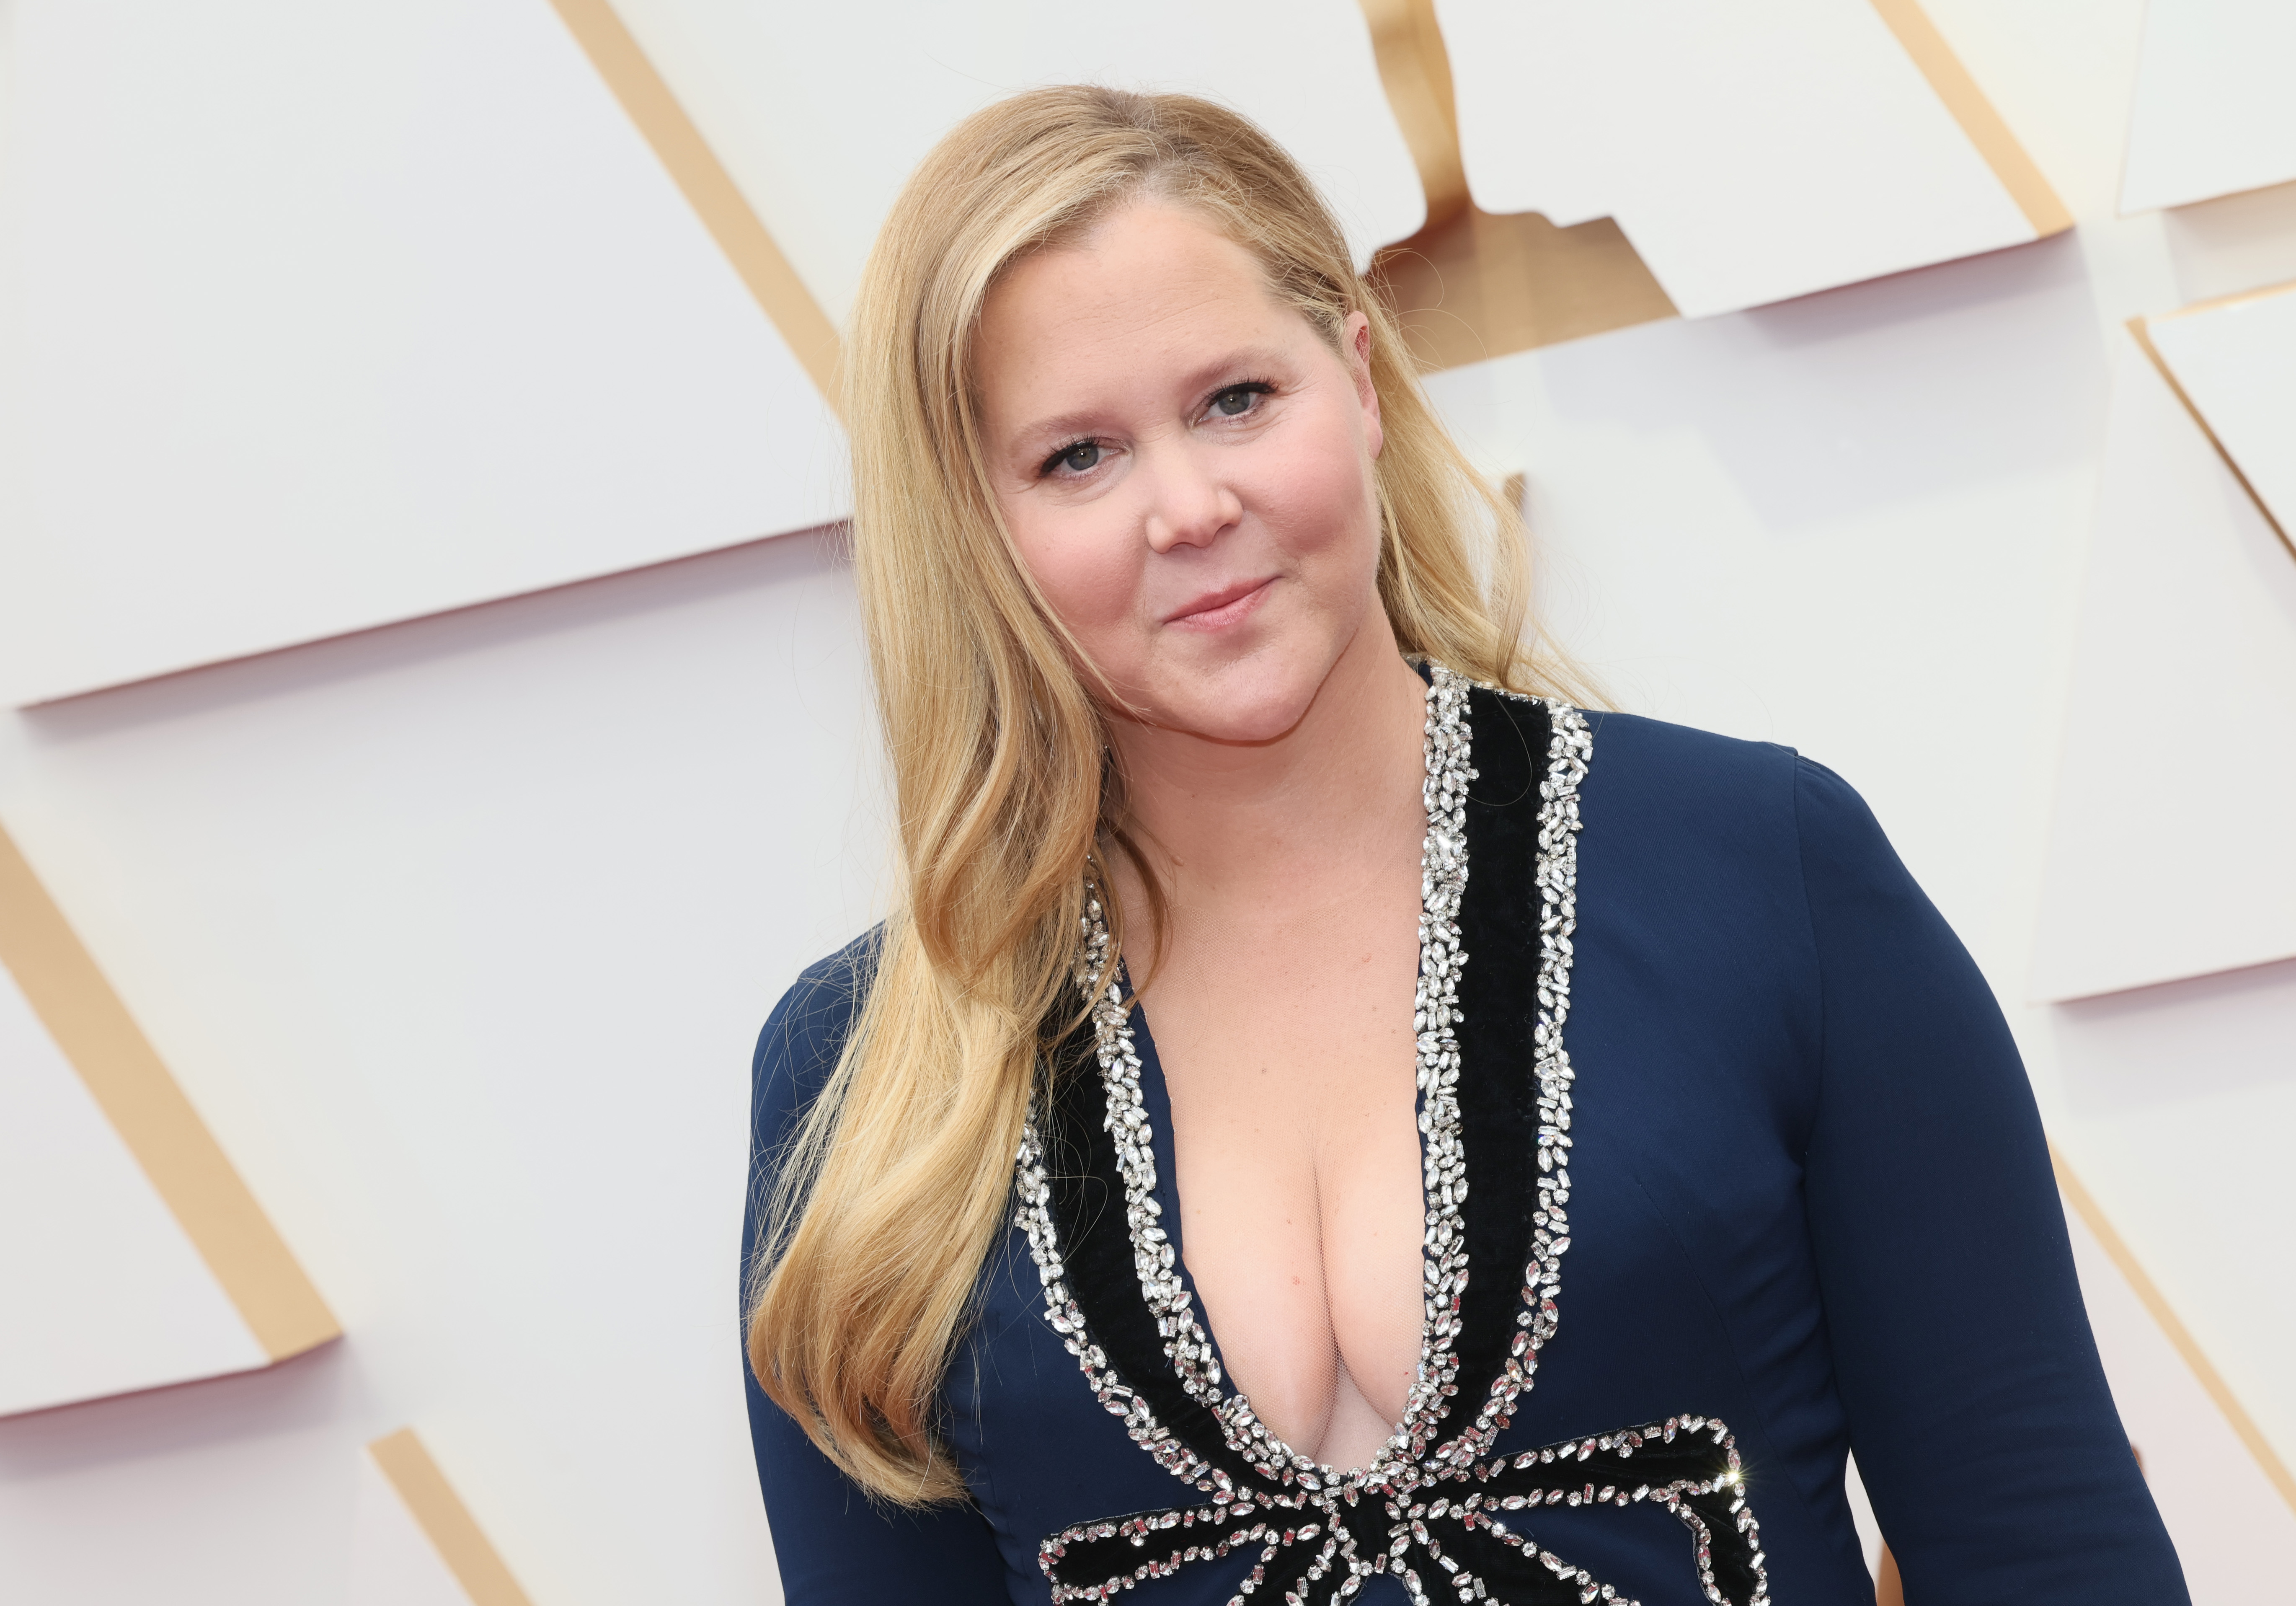 Amy Schumer attends the 94th Annual Academy Awards at Hollywood and Highland on March 27, 2022 in Hollywood, California.